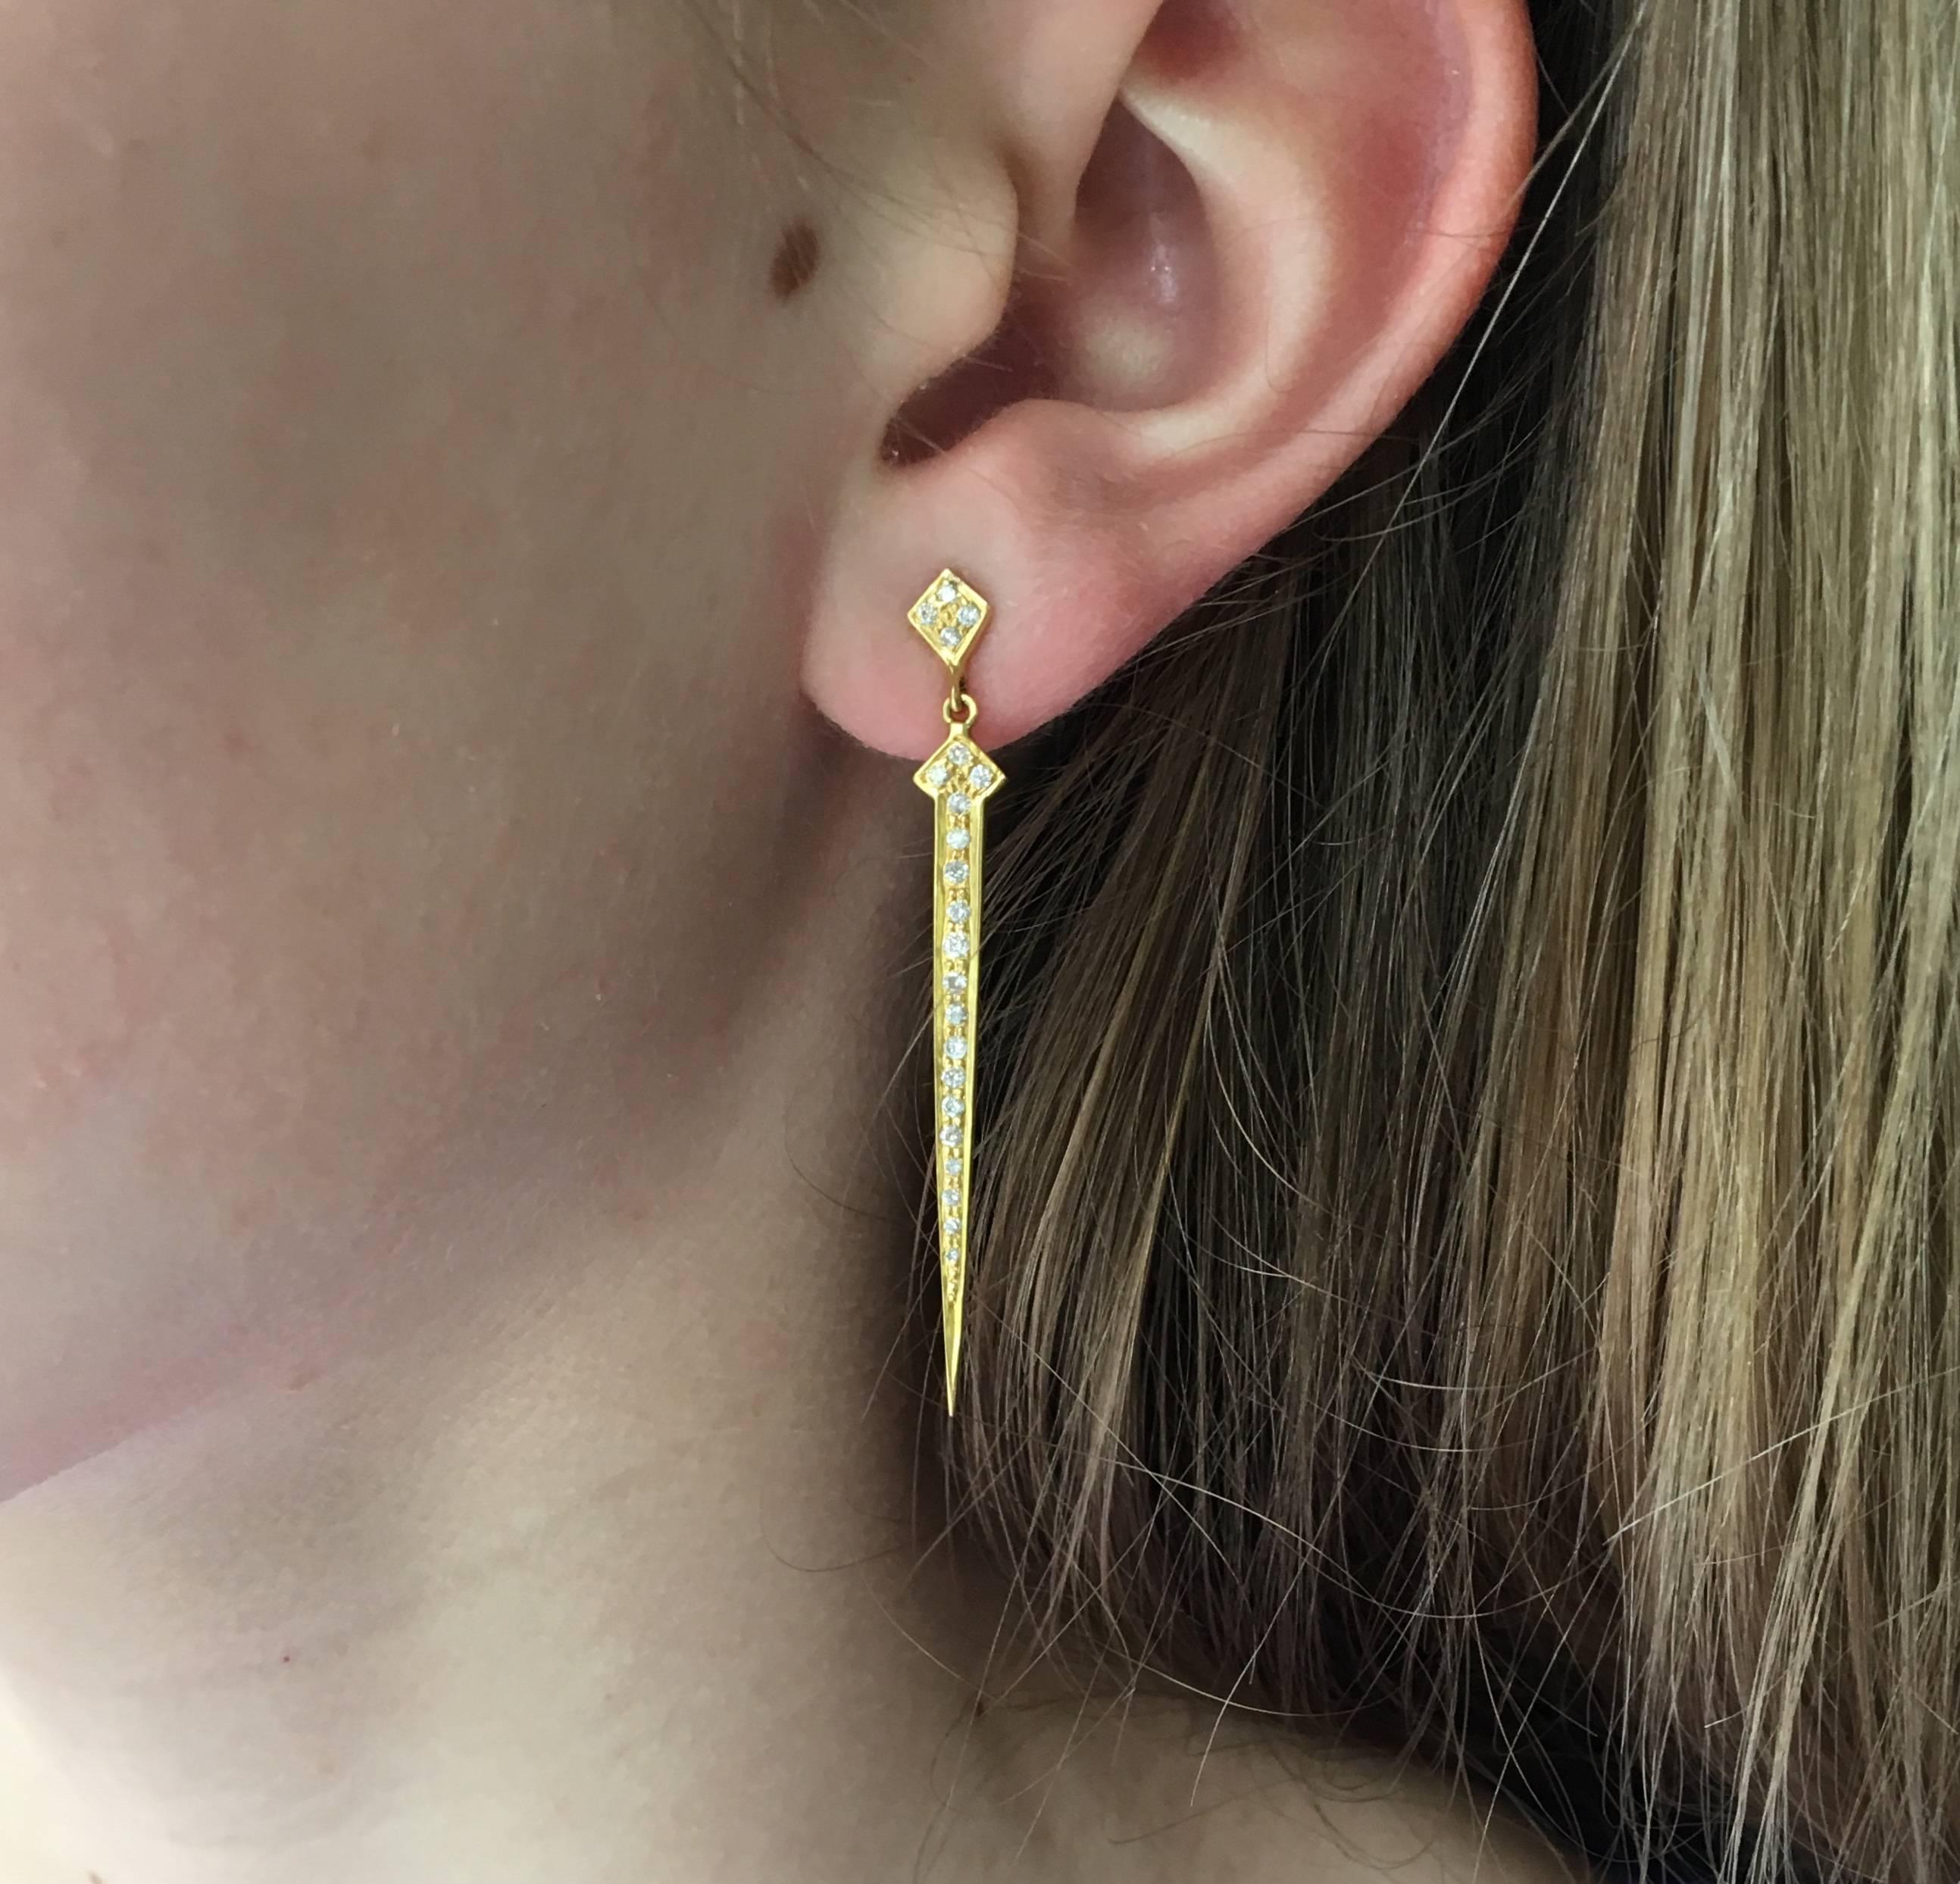 These 18kt Yellow Gold and Diamond dagger post earrings will make you feel fierce.  Finished in Lauren Harper's signature matte gold, these earrings are perfect for both day and evening wear.  Ships directly from original designer and creator,